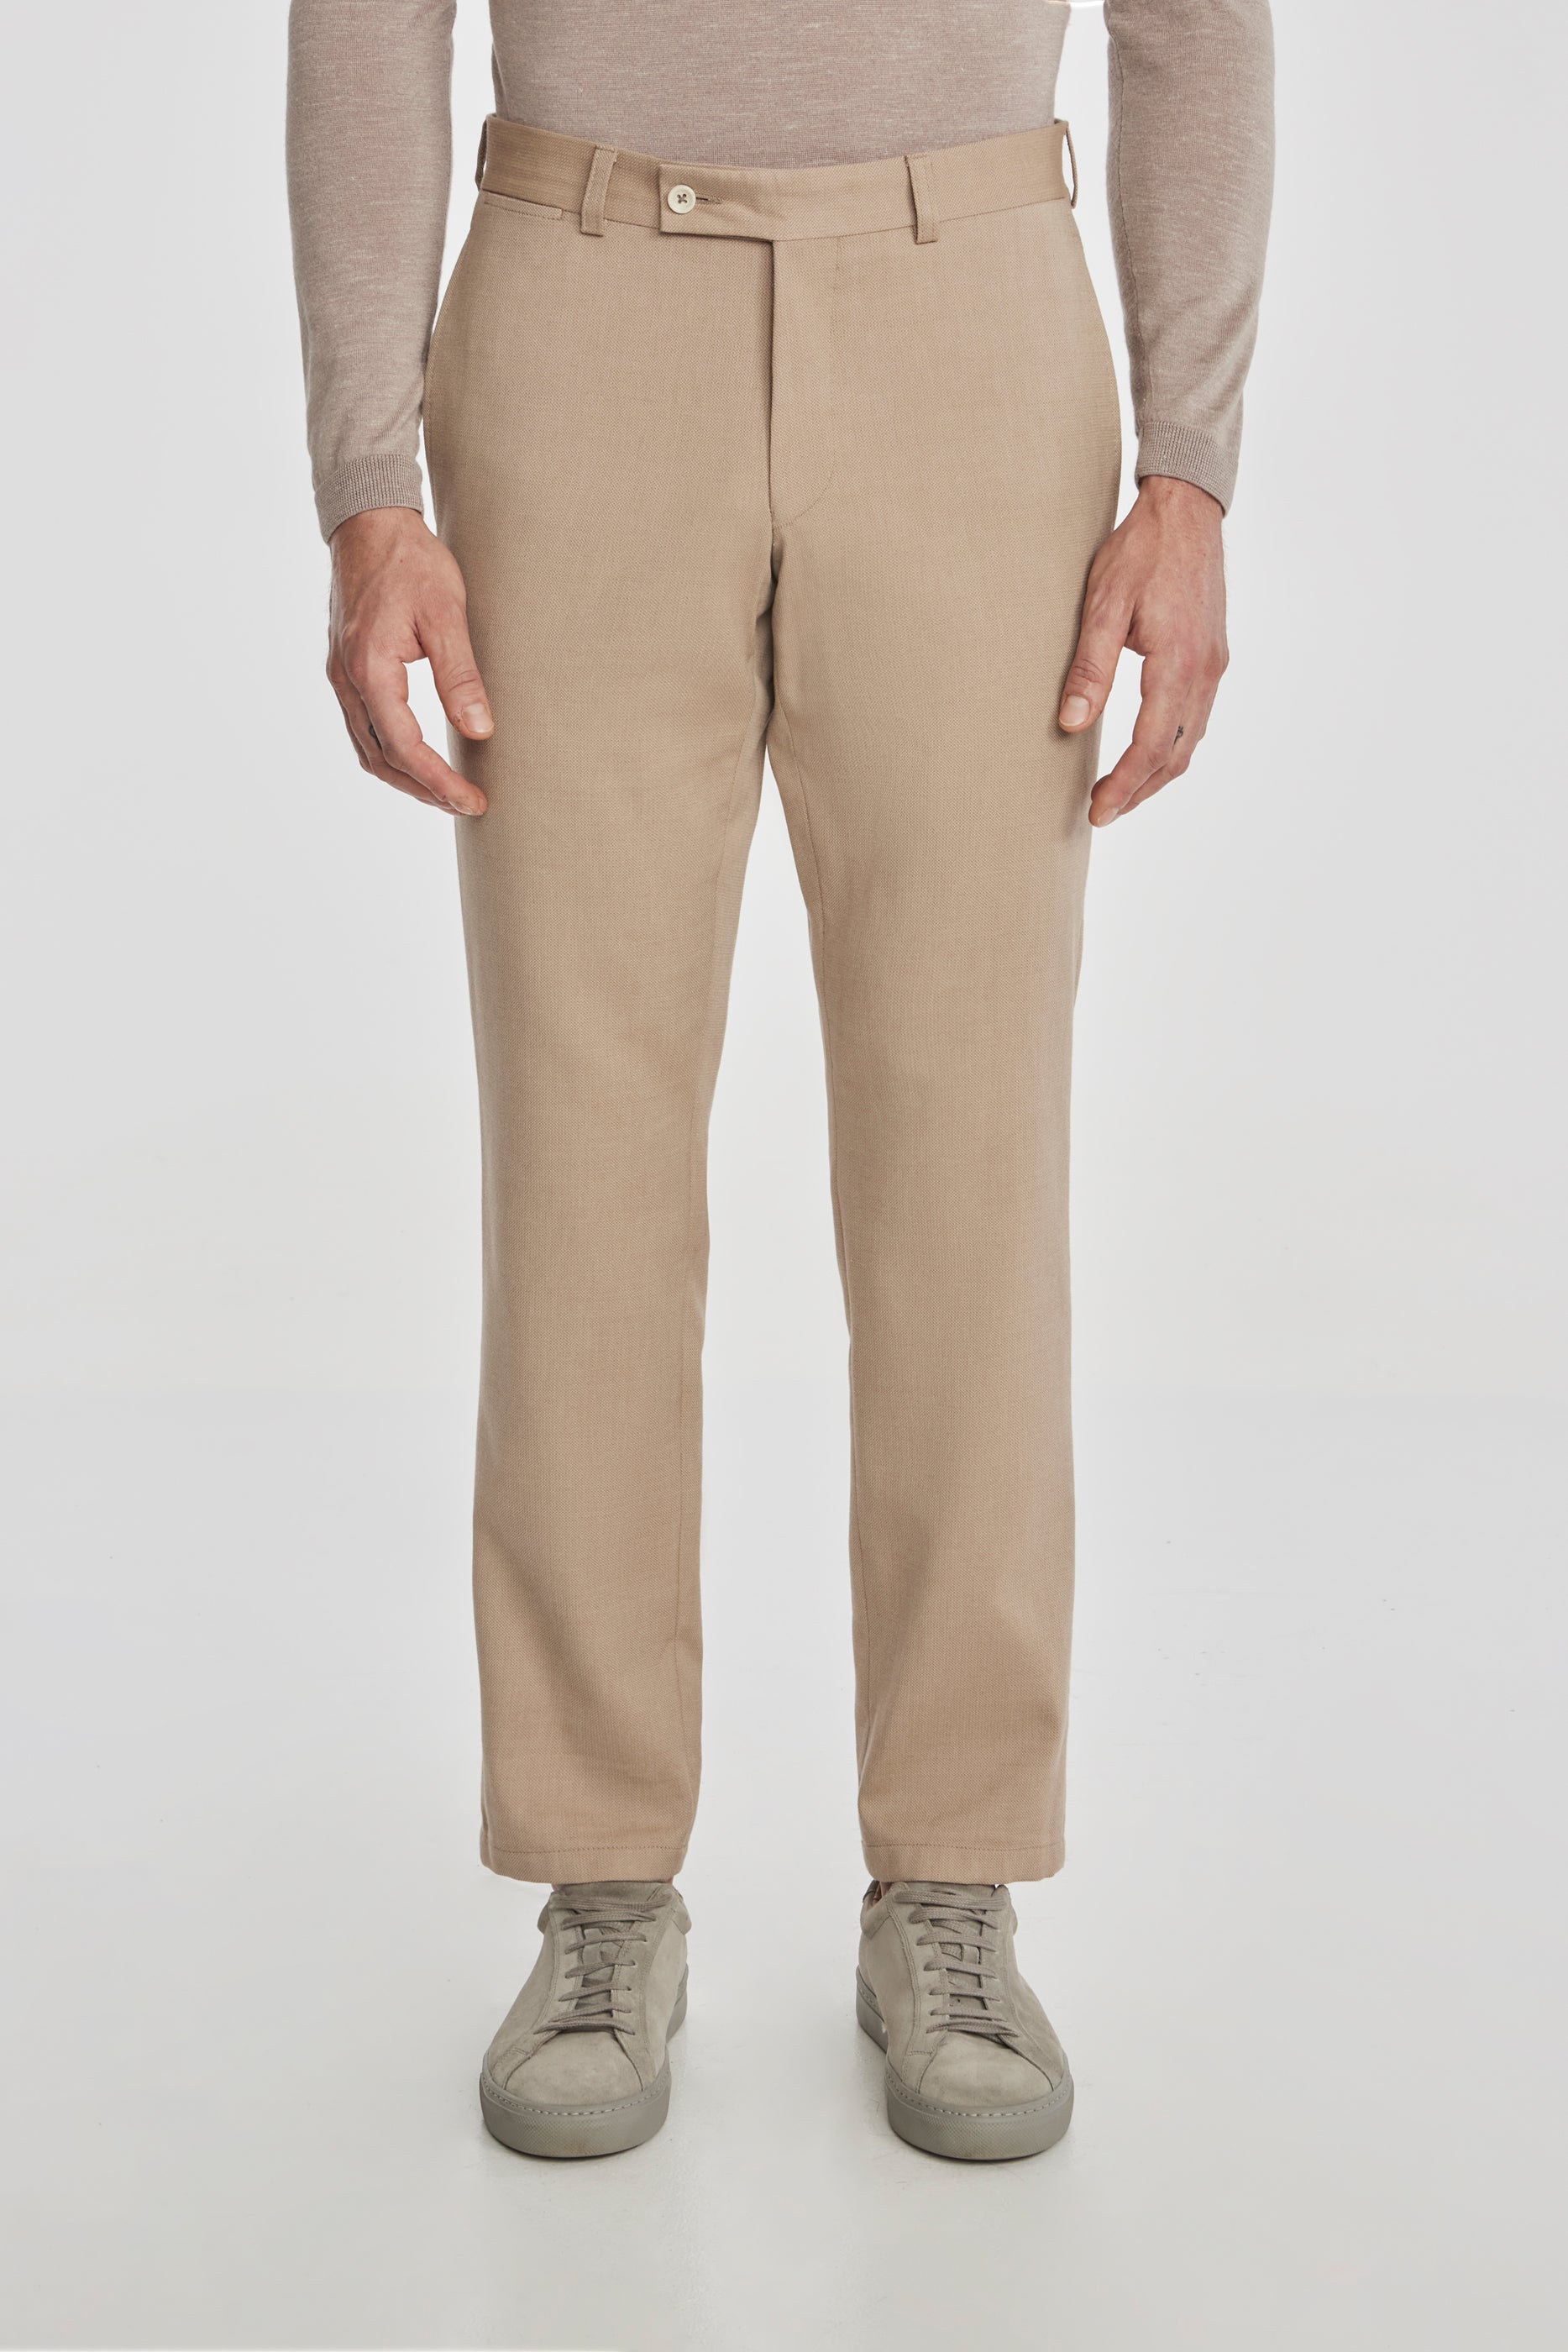 Jack Victor Men's Palmer Textured Cotton, Wool Stretch Trouser in Tan